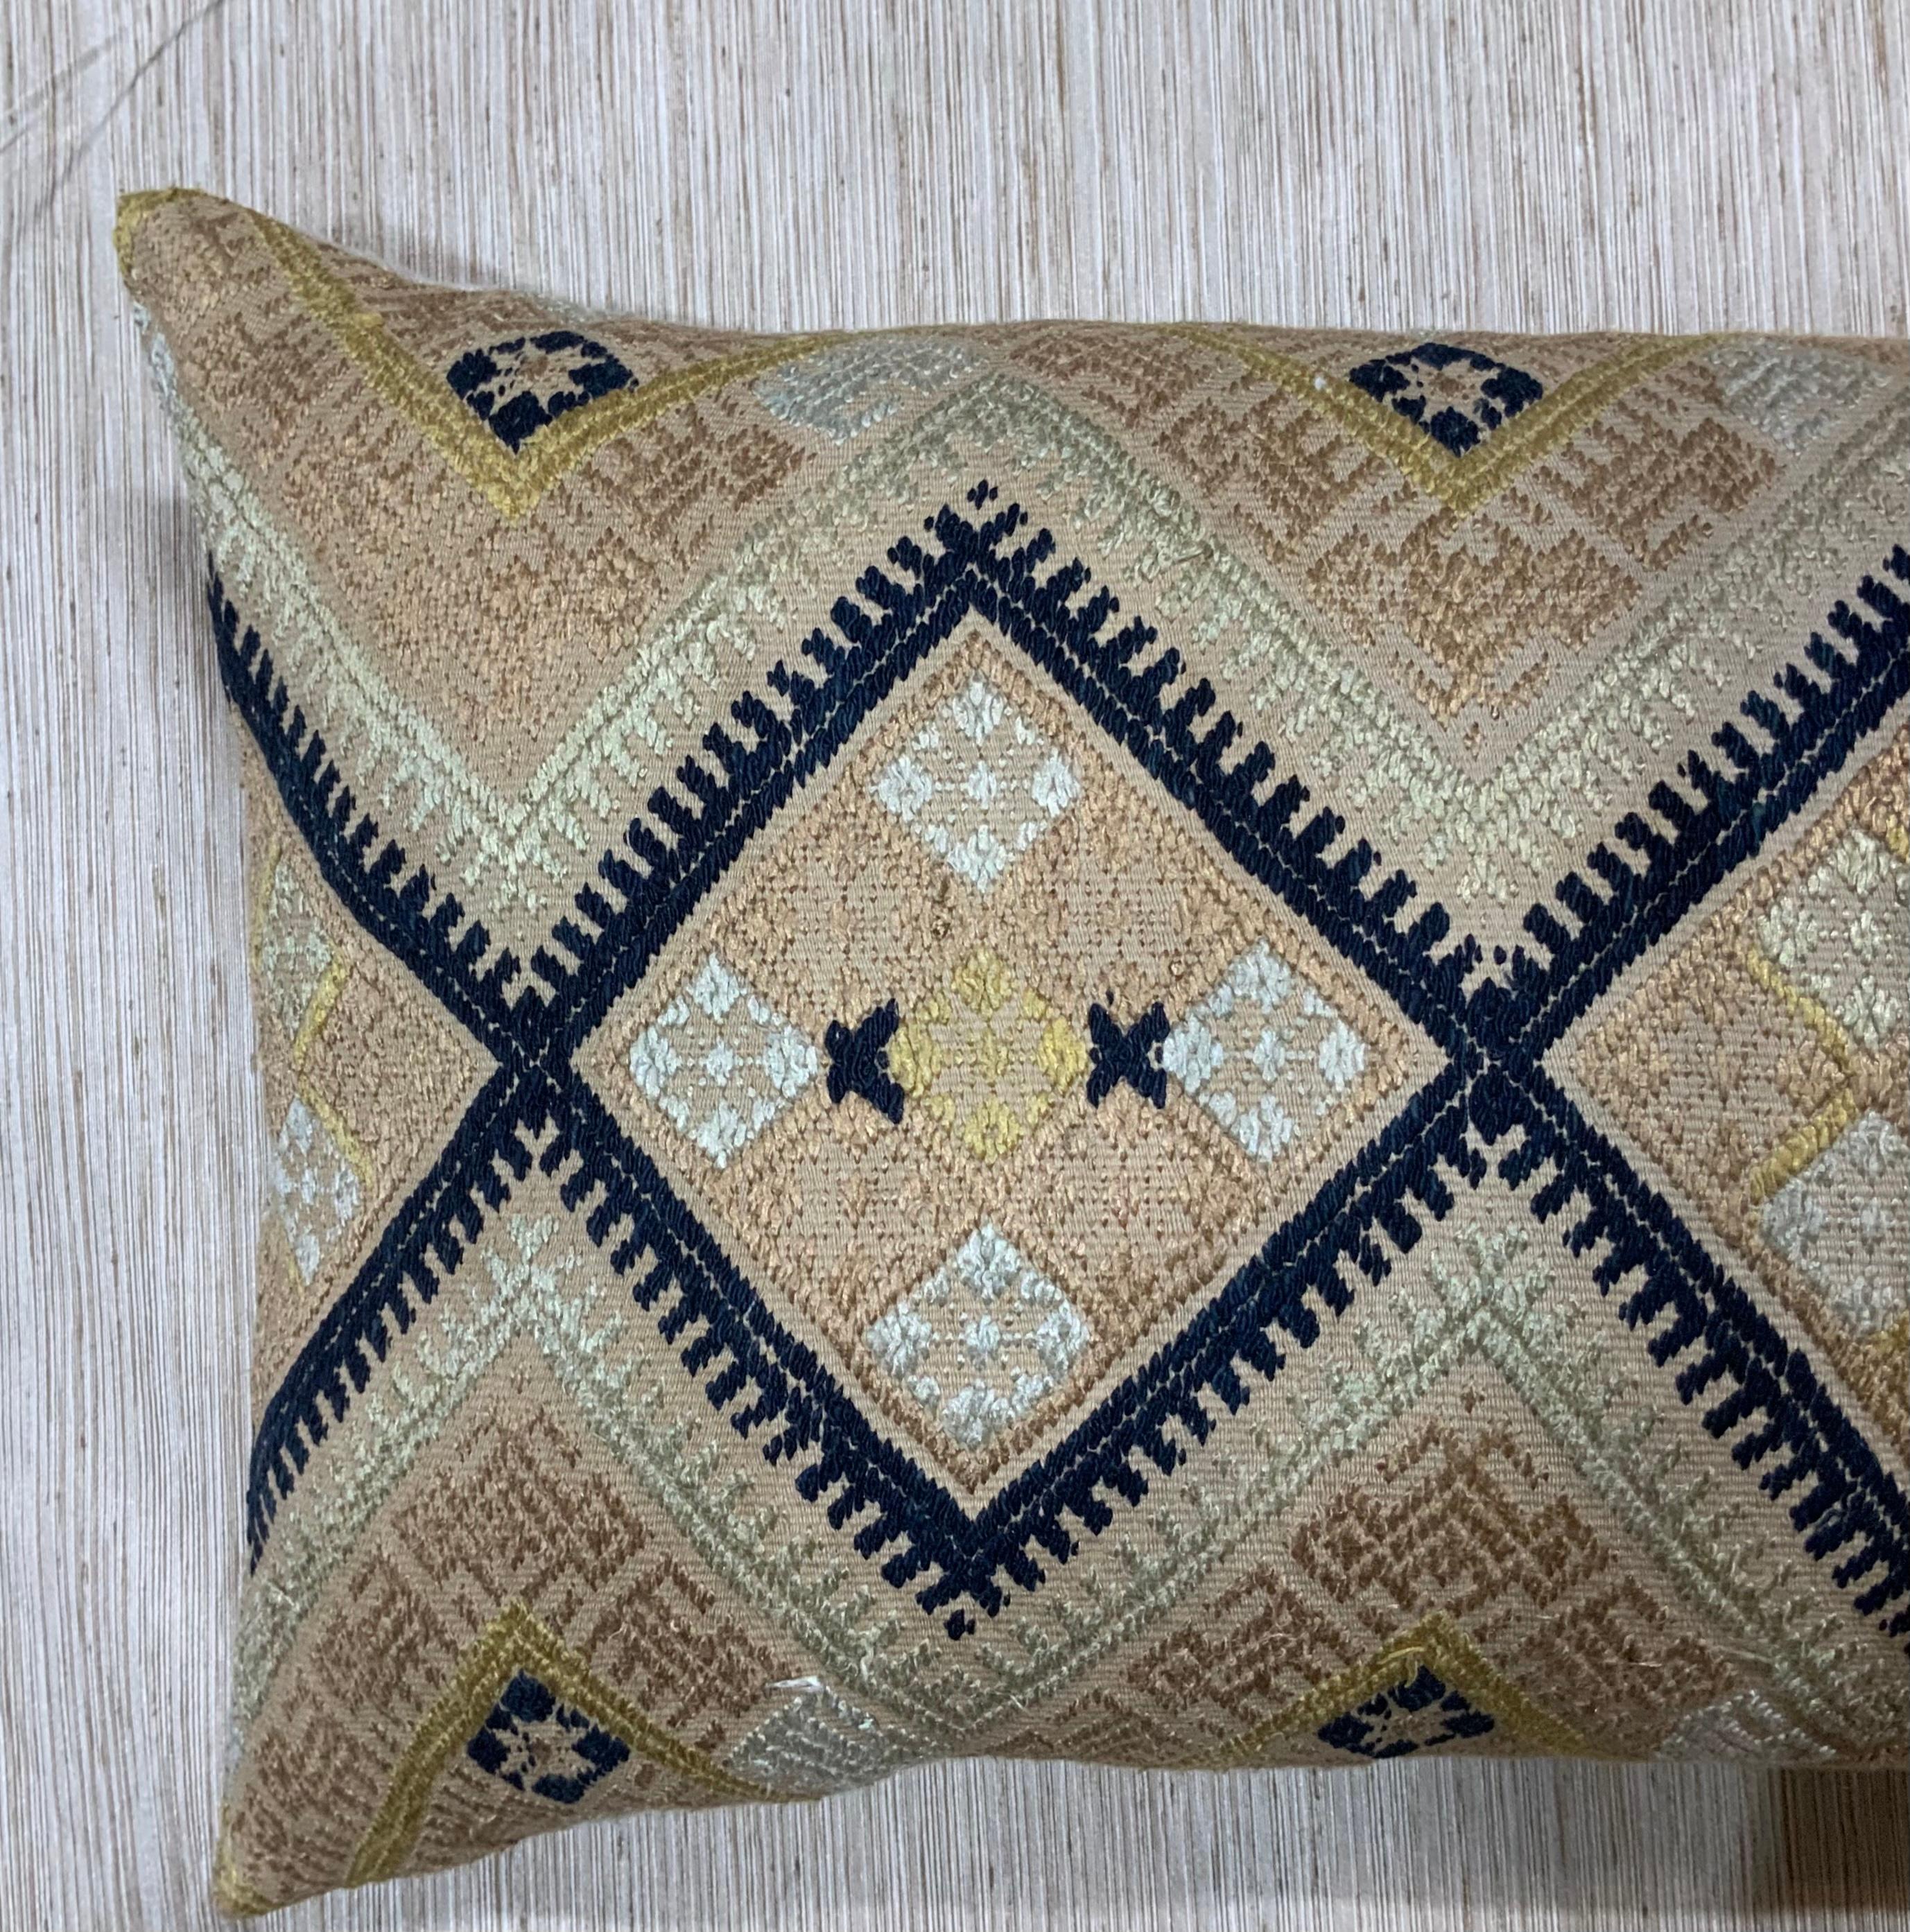 Vintage Hand Embroidery Suzani Pillows 1